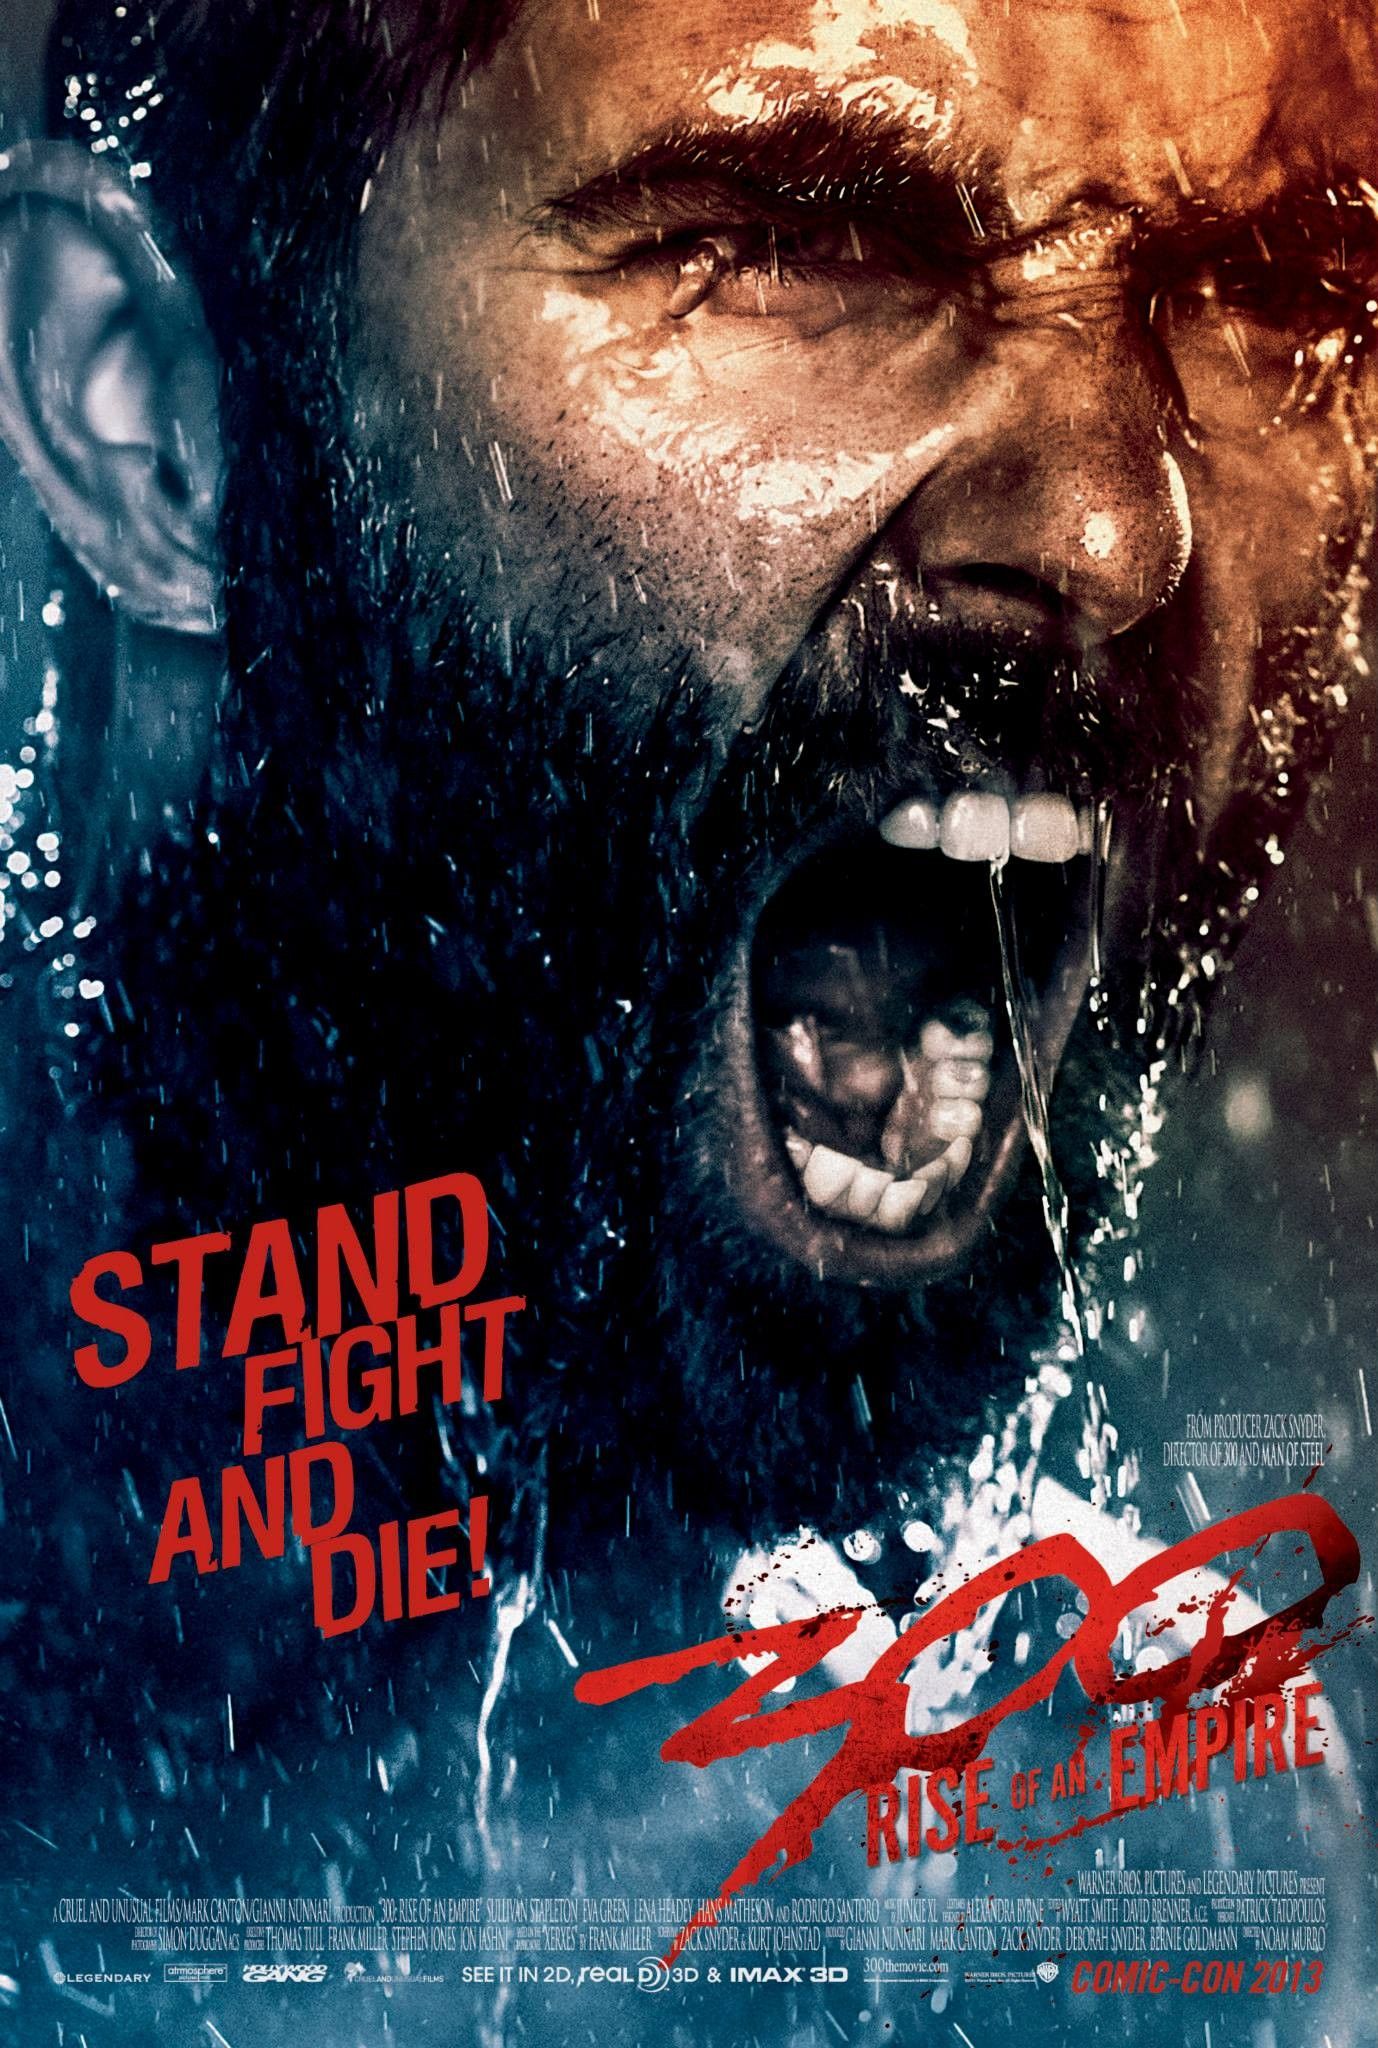 300 Rise of an Empire Poster Comic Con 2013